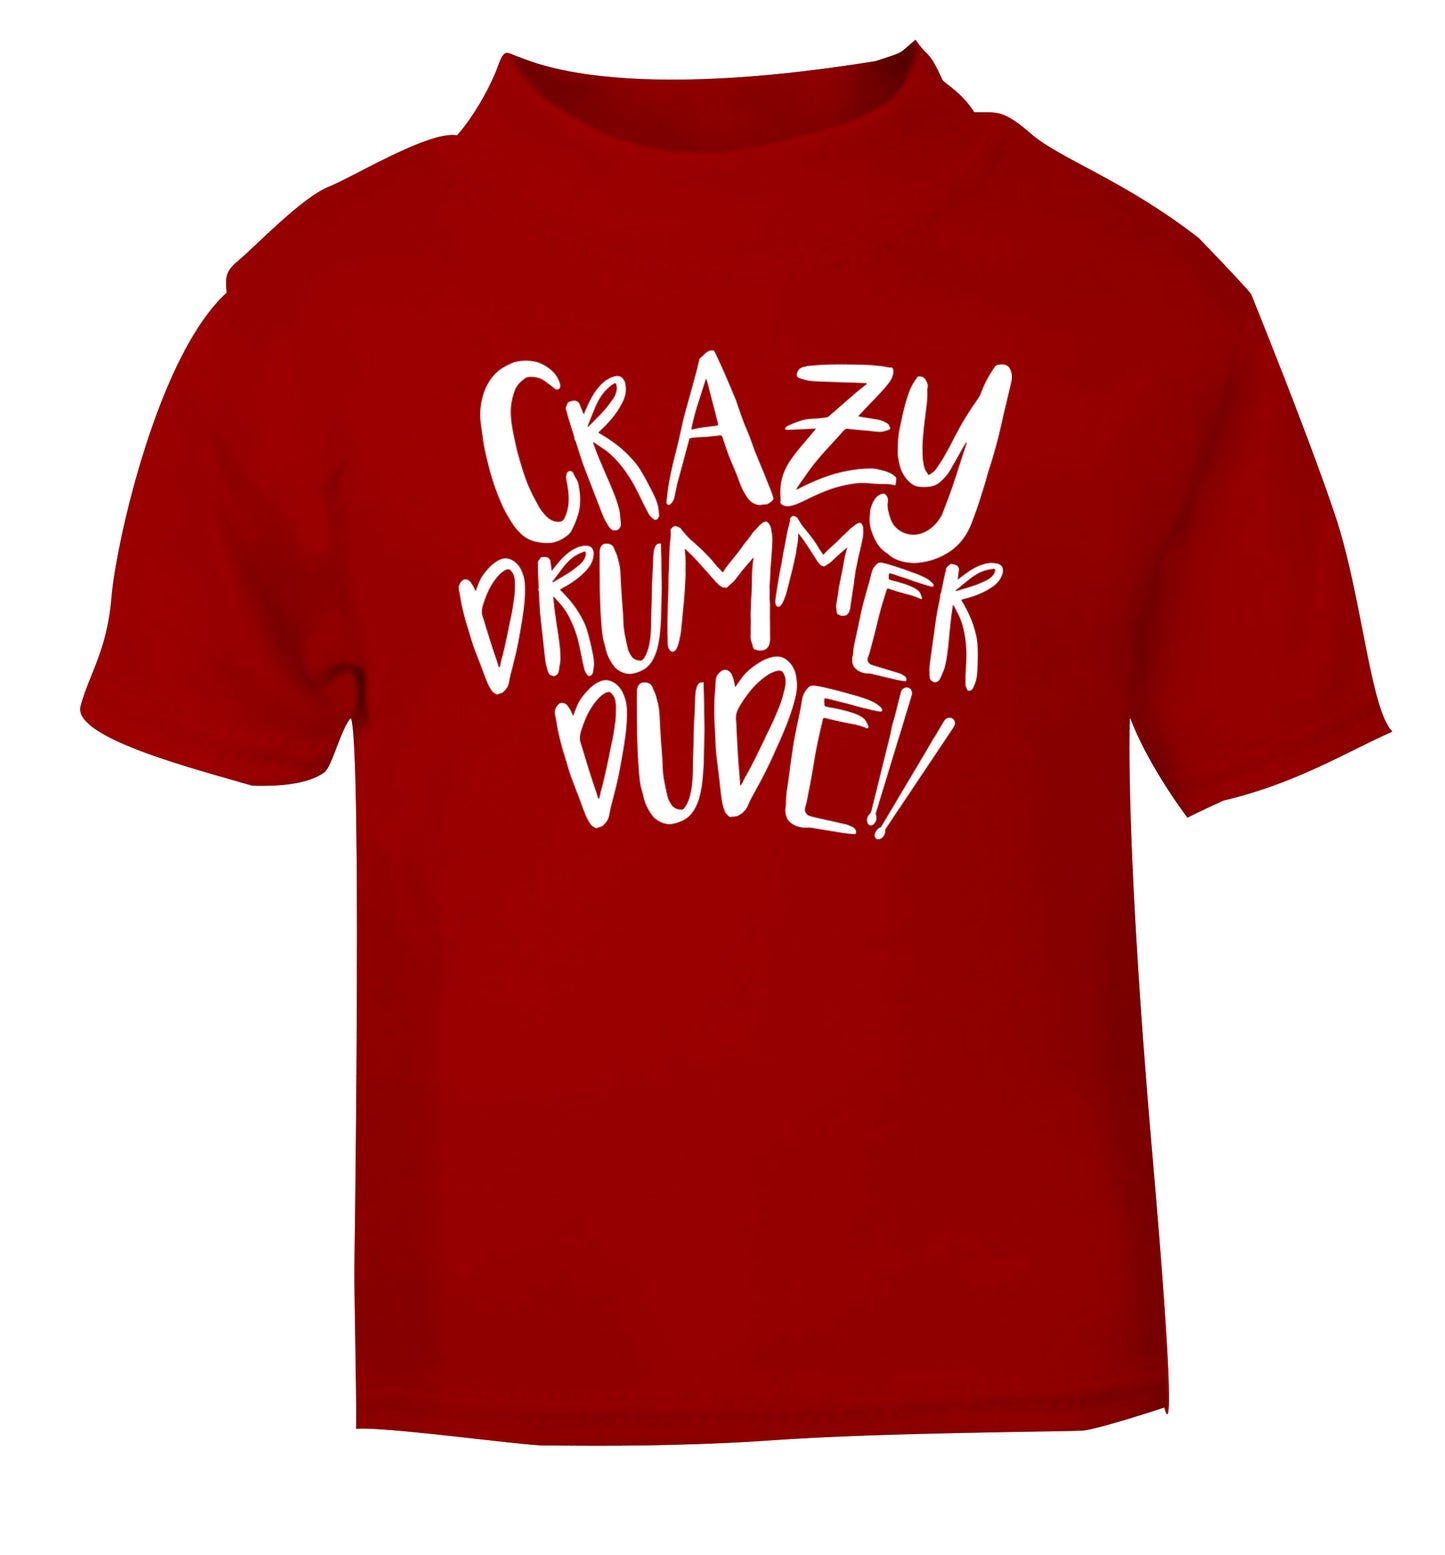 Crazy drummer dude red Baby Toddler Tshirt 2 Years